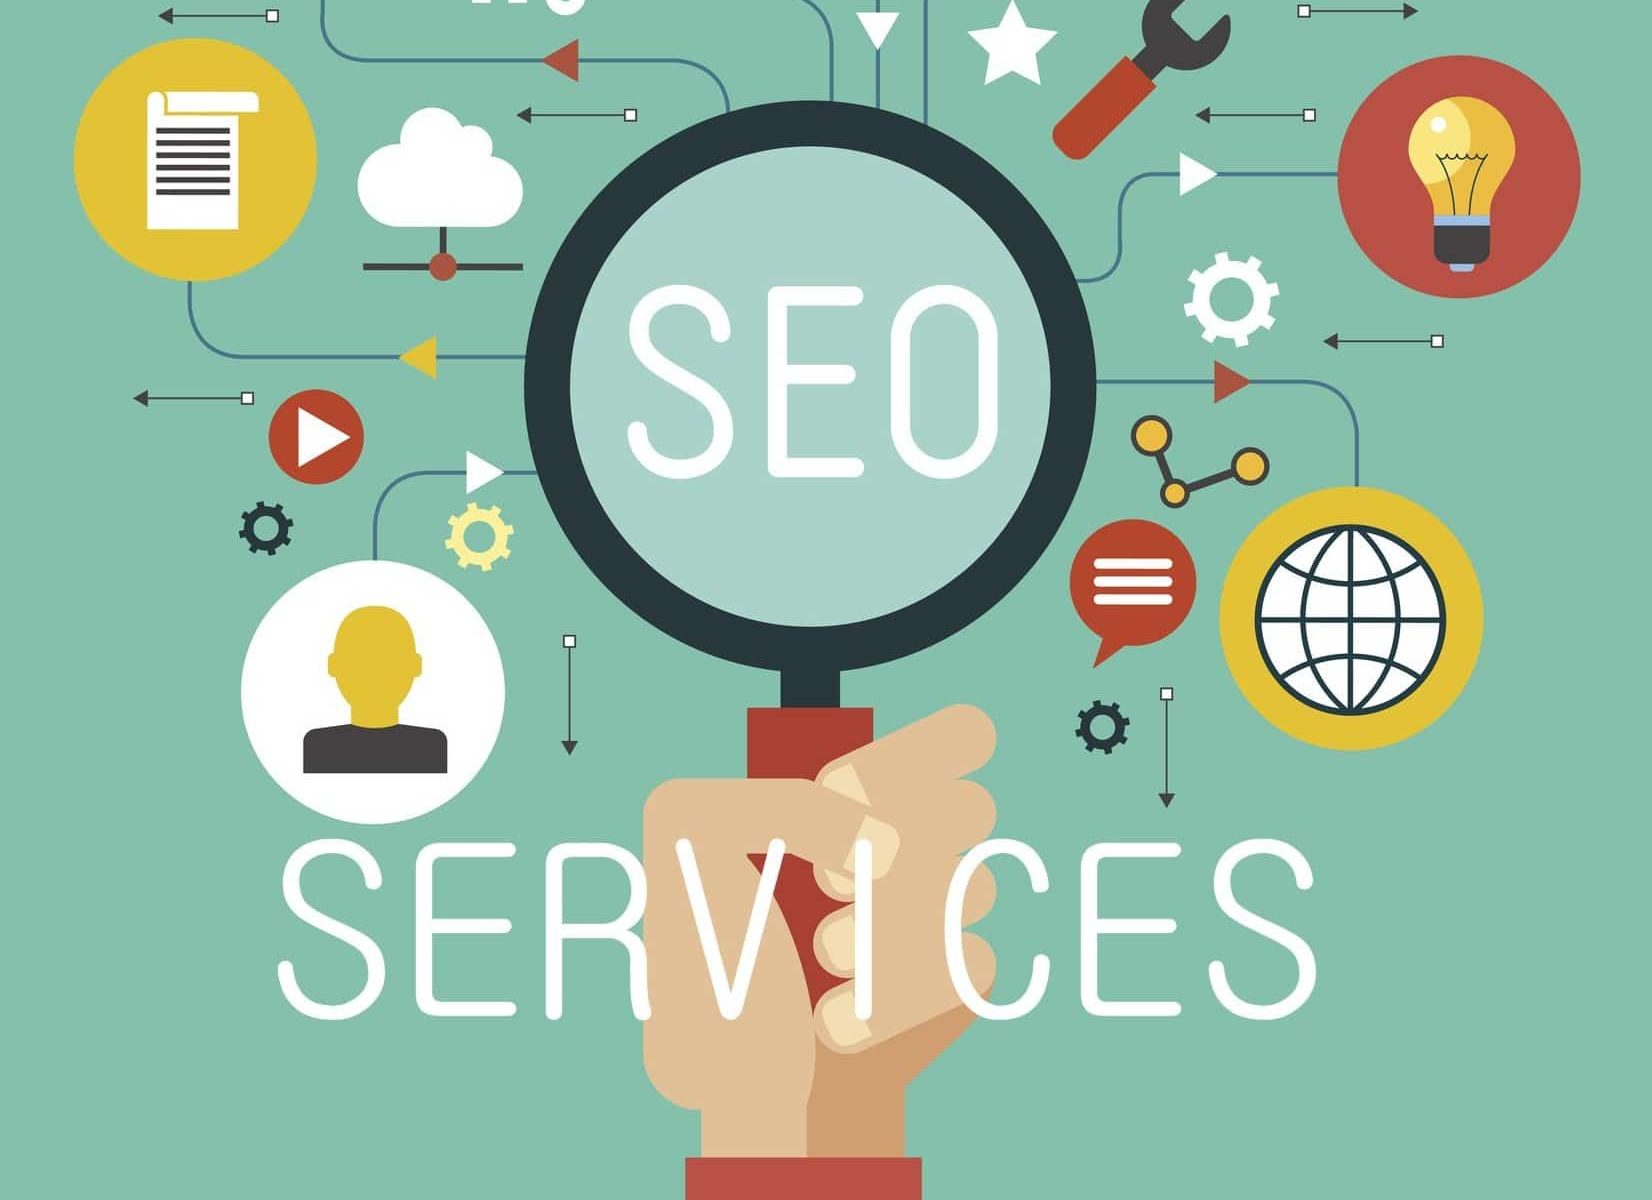 Why Is Seo Important In Web Design?